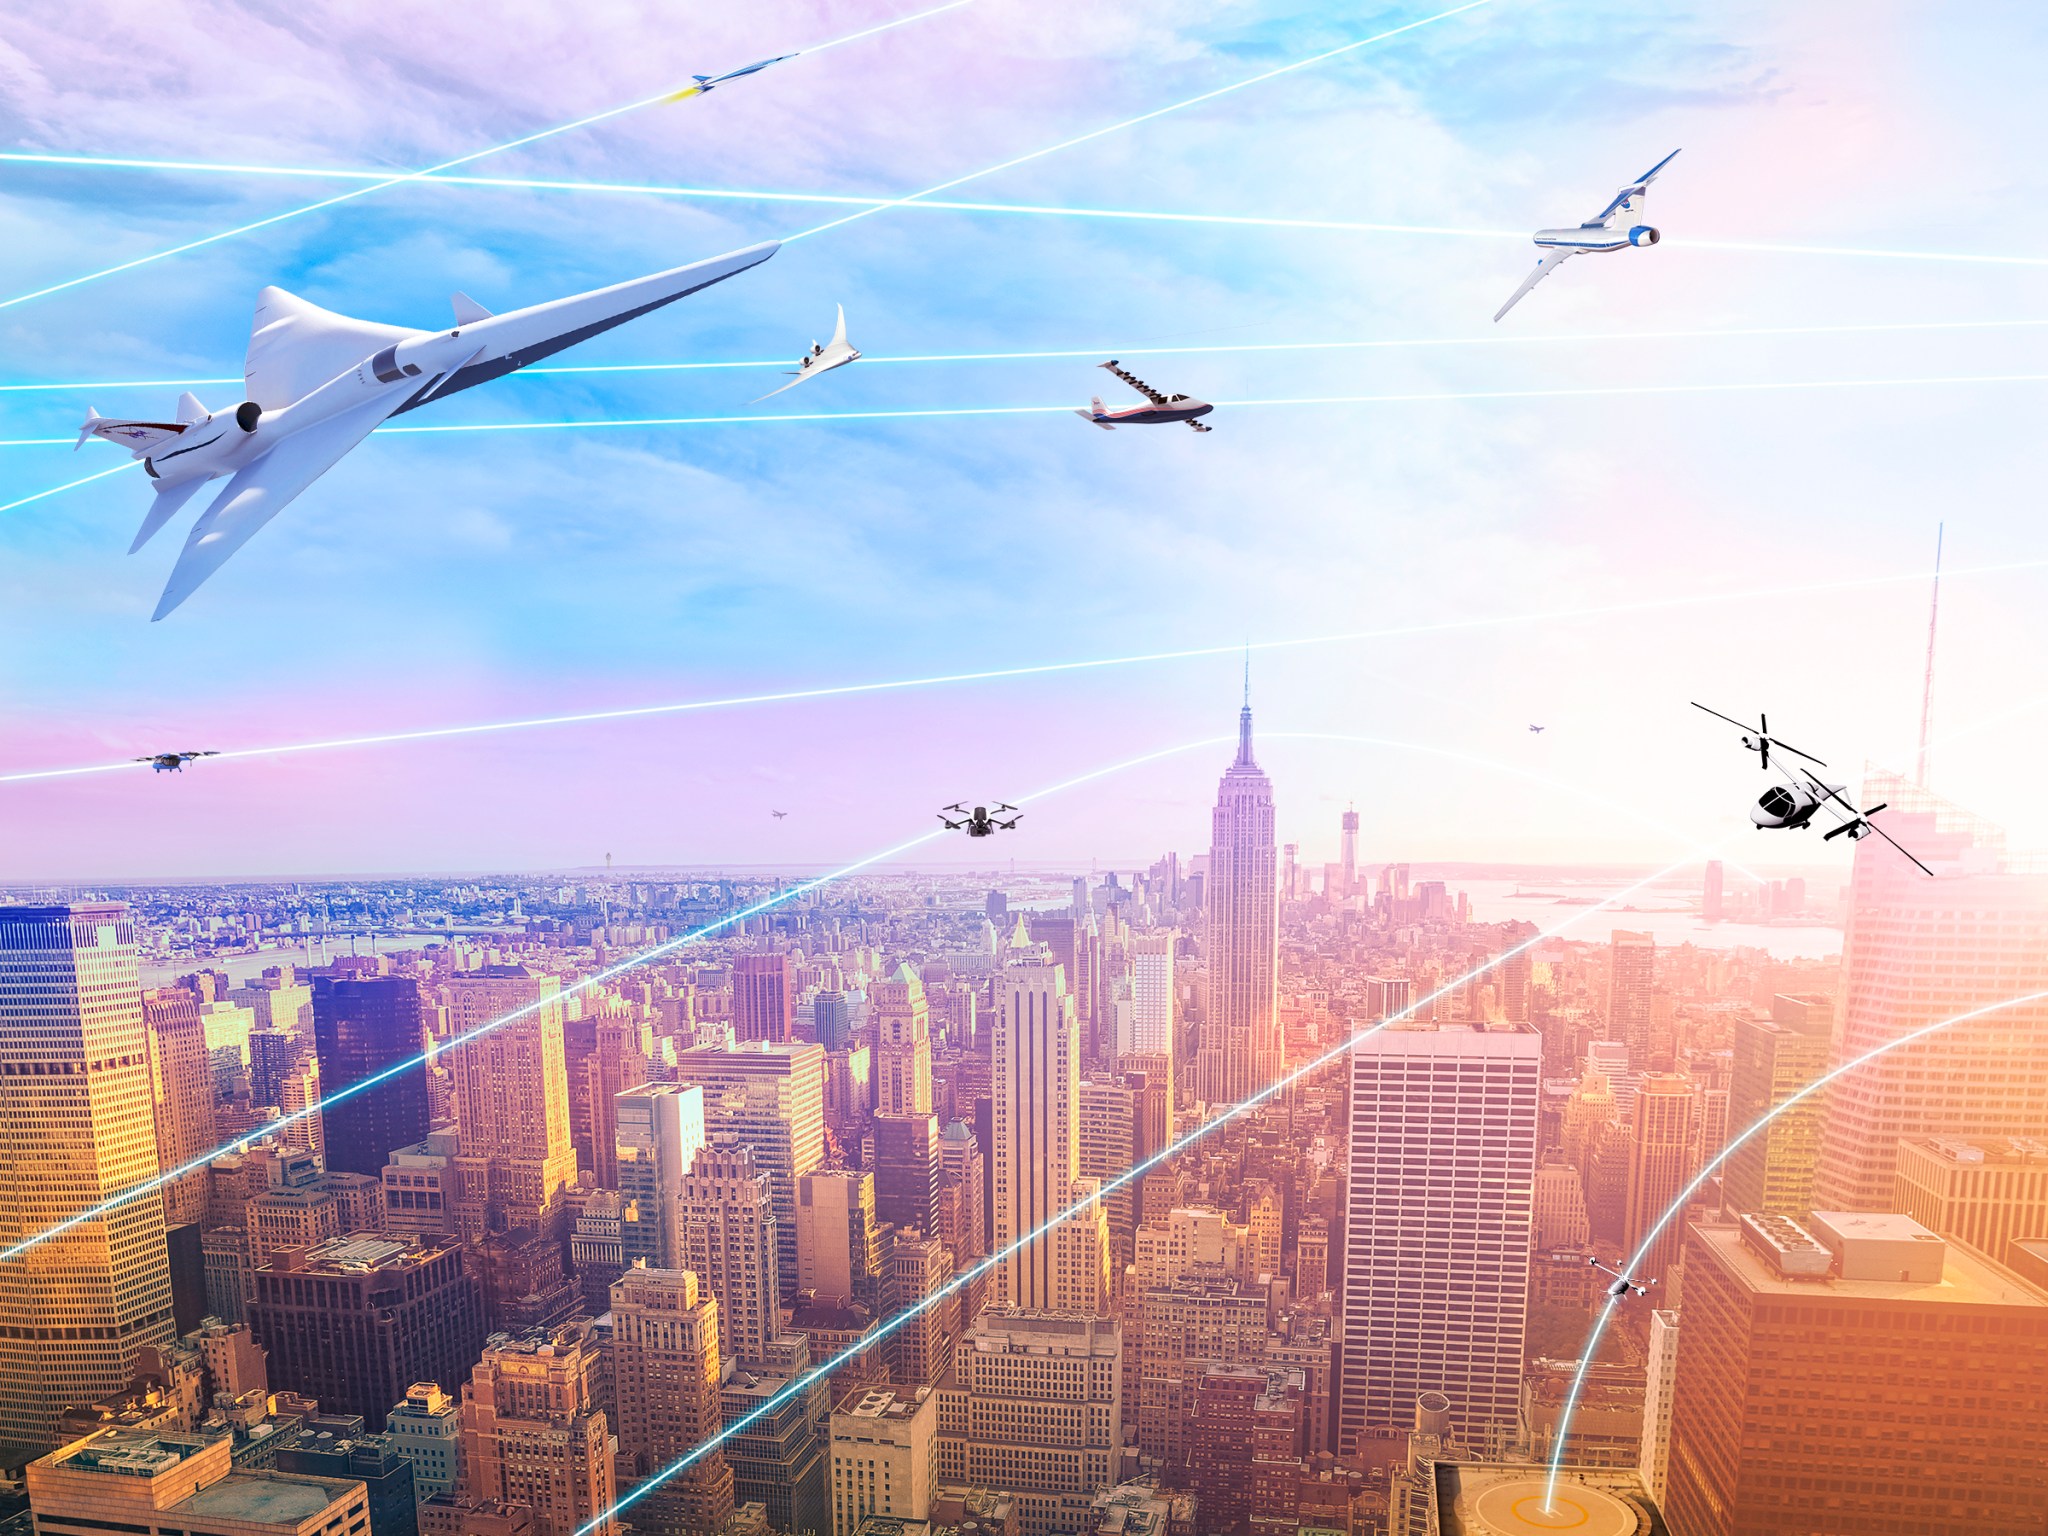 Artist concept of various aircraft in flight over an urban area.